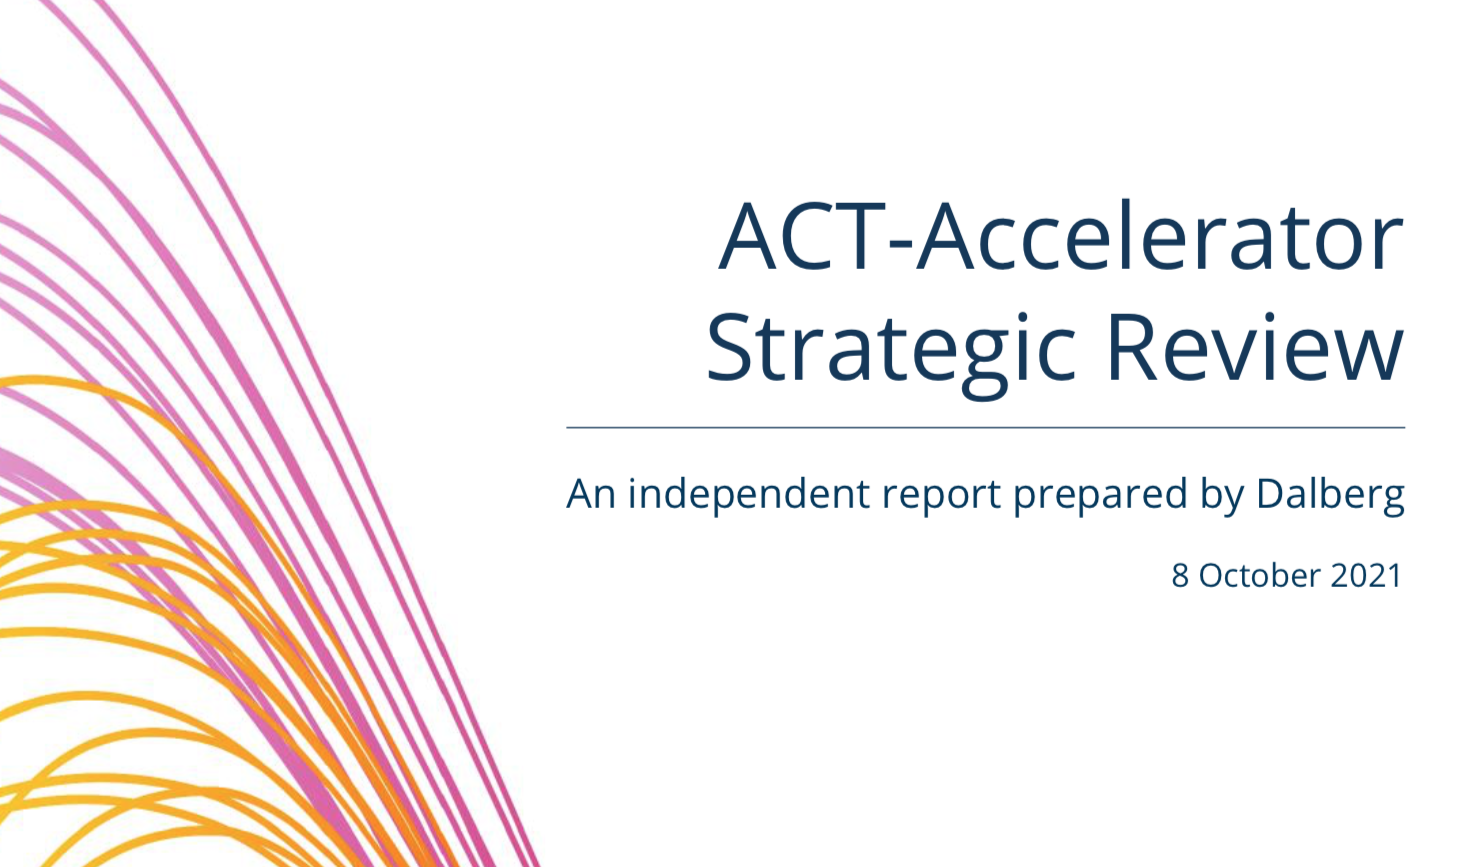 Publication of the ACT-Accelerator Strategic Review